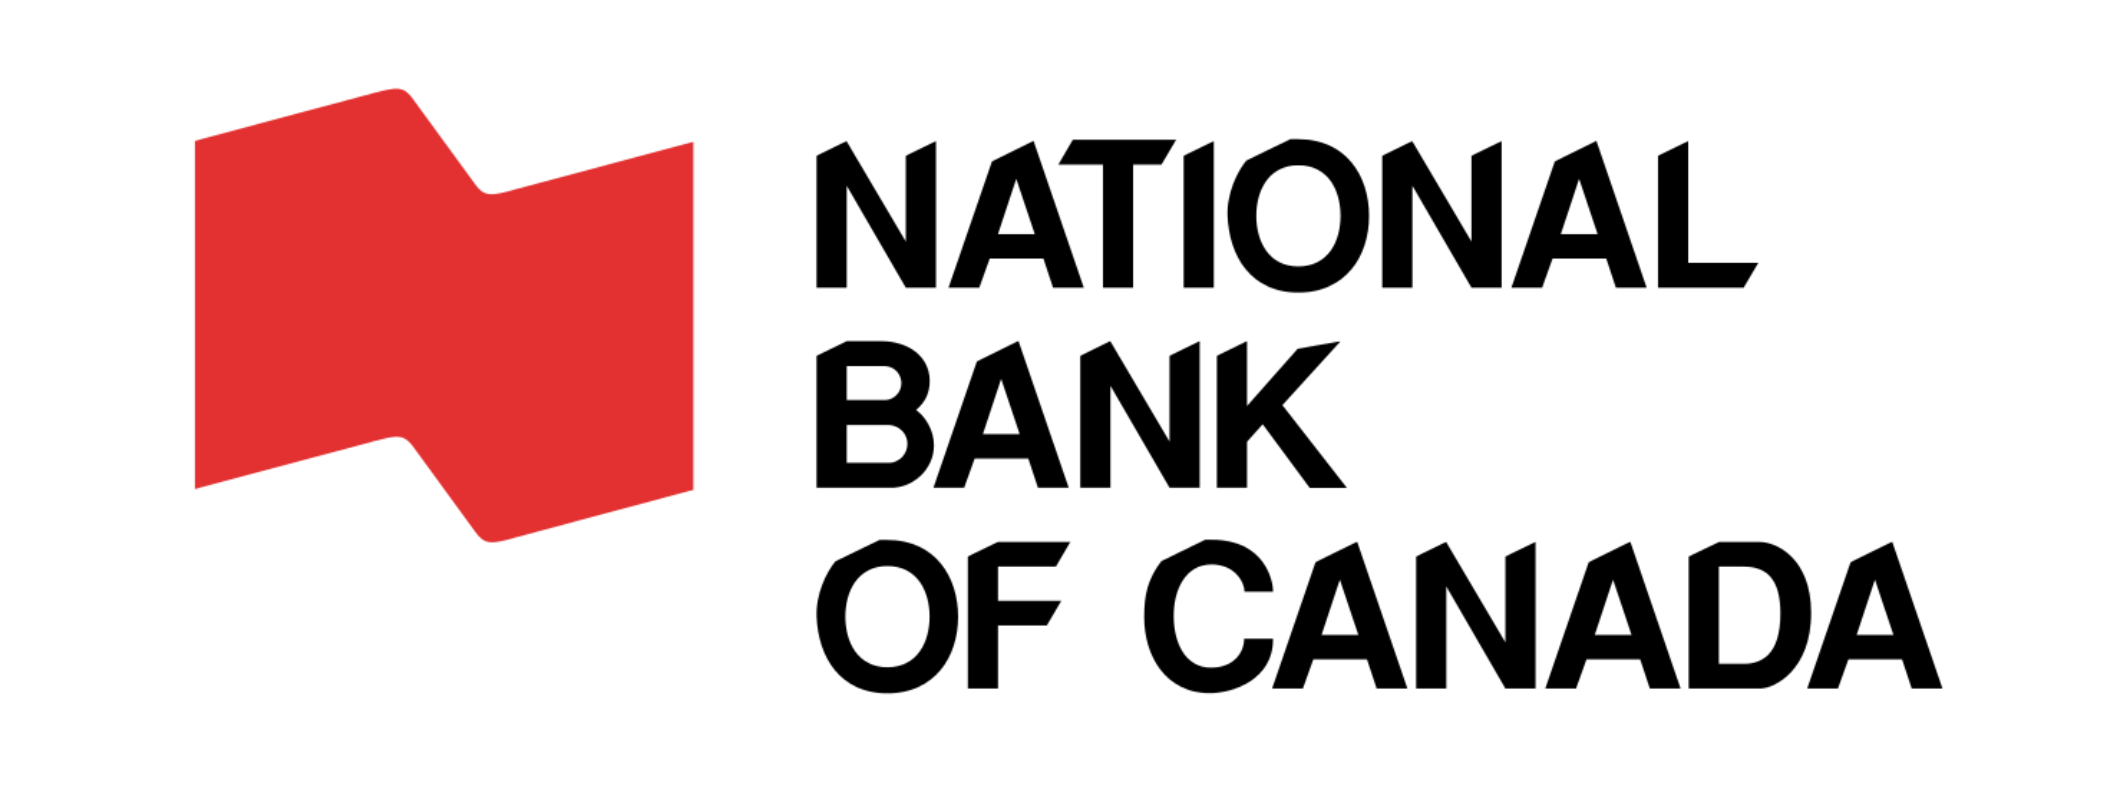 National Bank of Canada-3